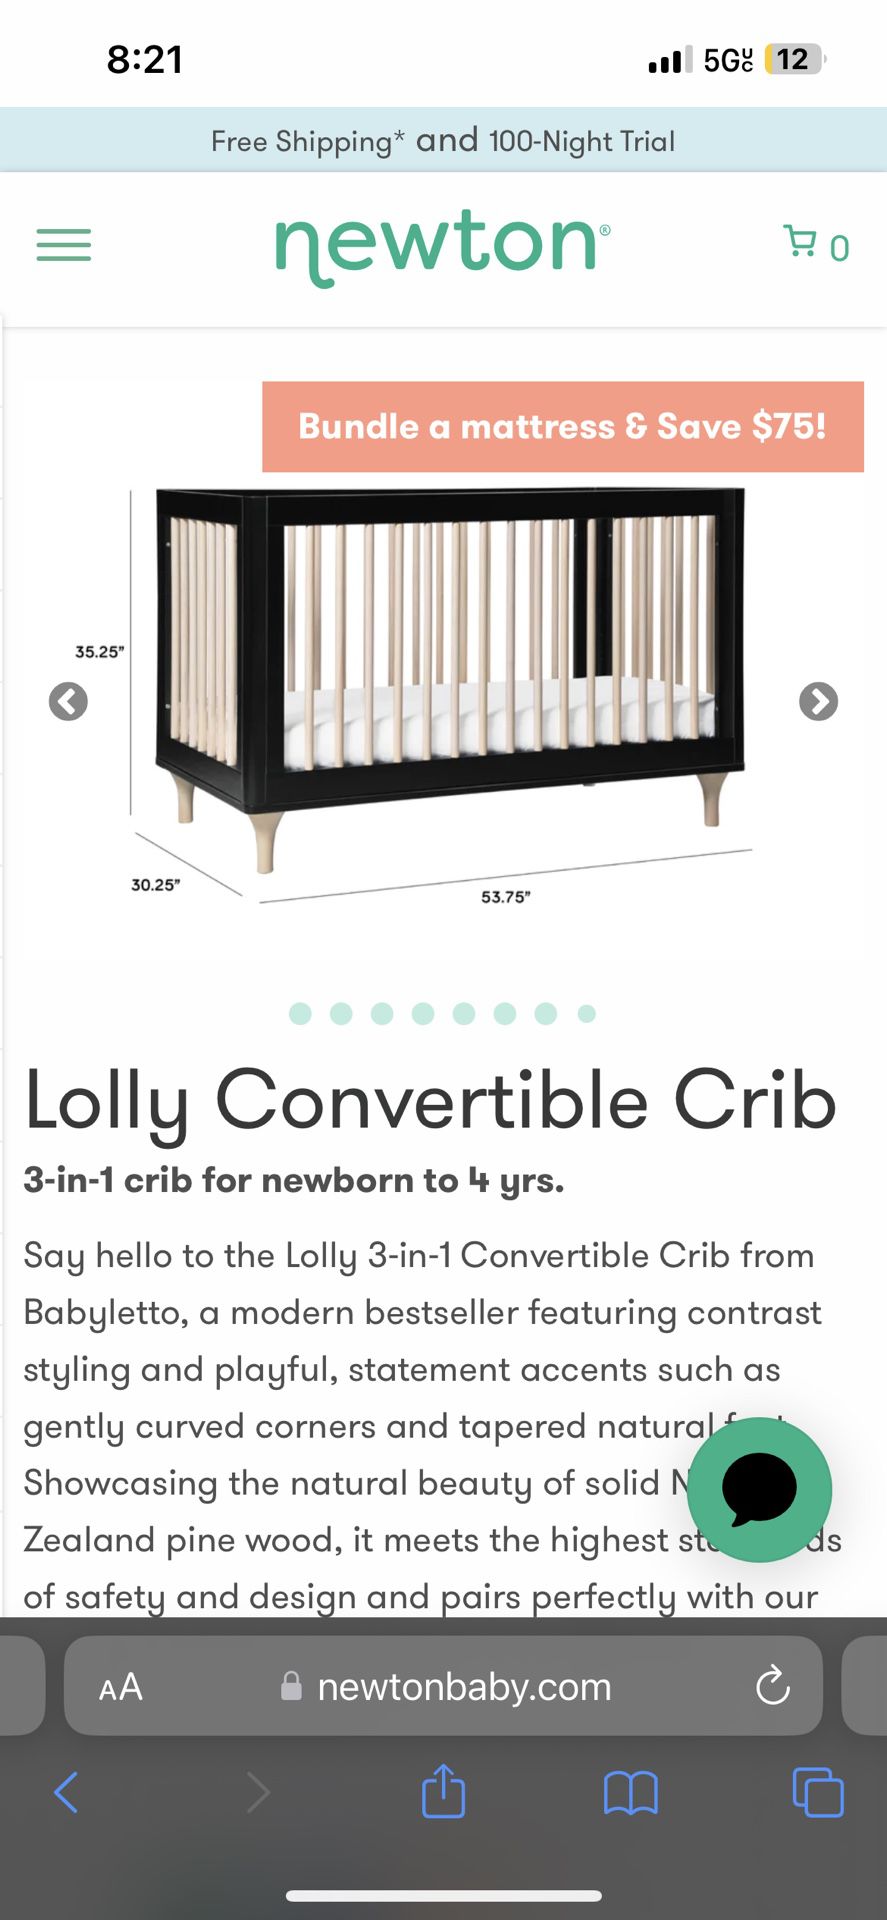 Convertible Crib With Breathable Washable Mattress “lolly & Baby newton Brand “